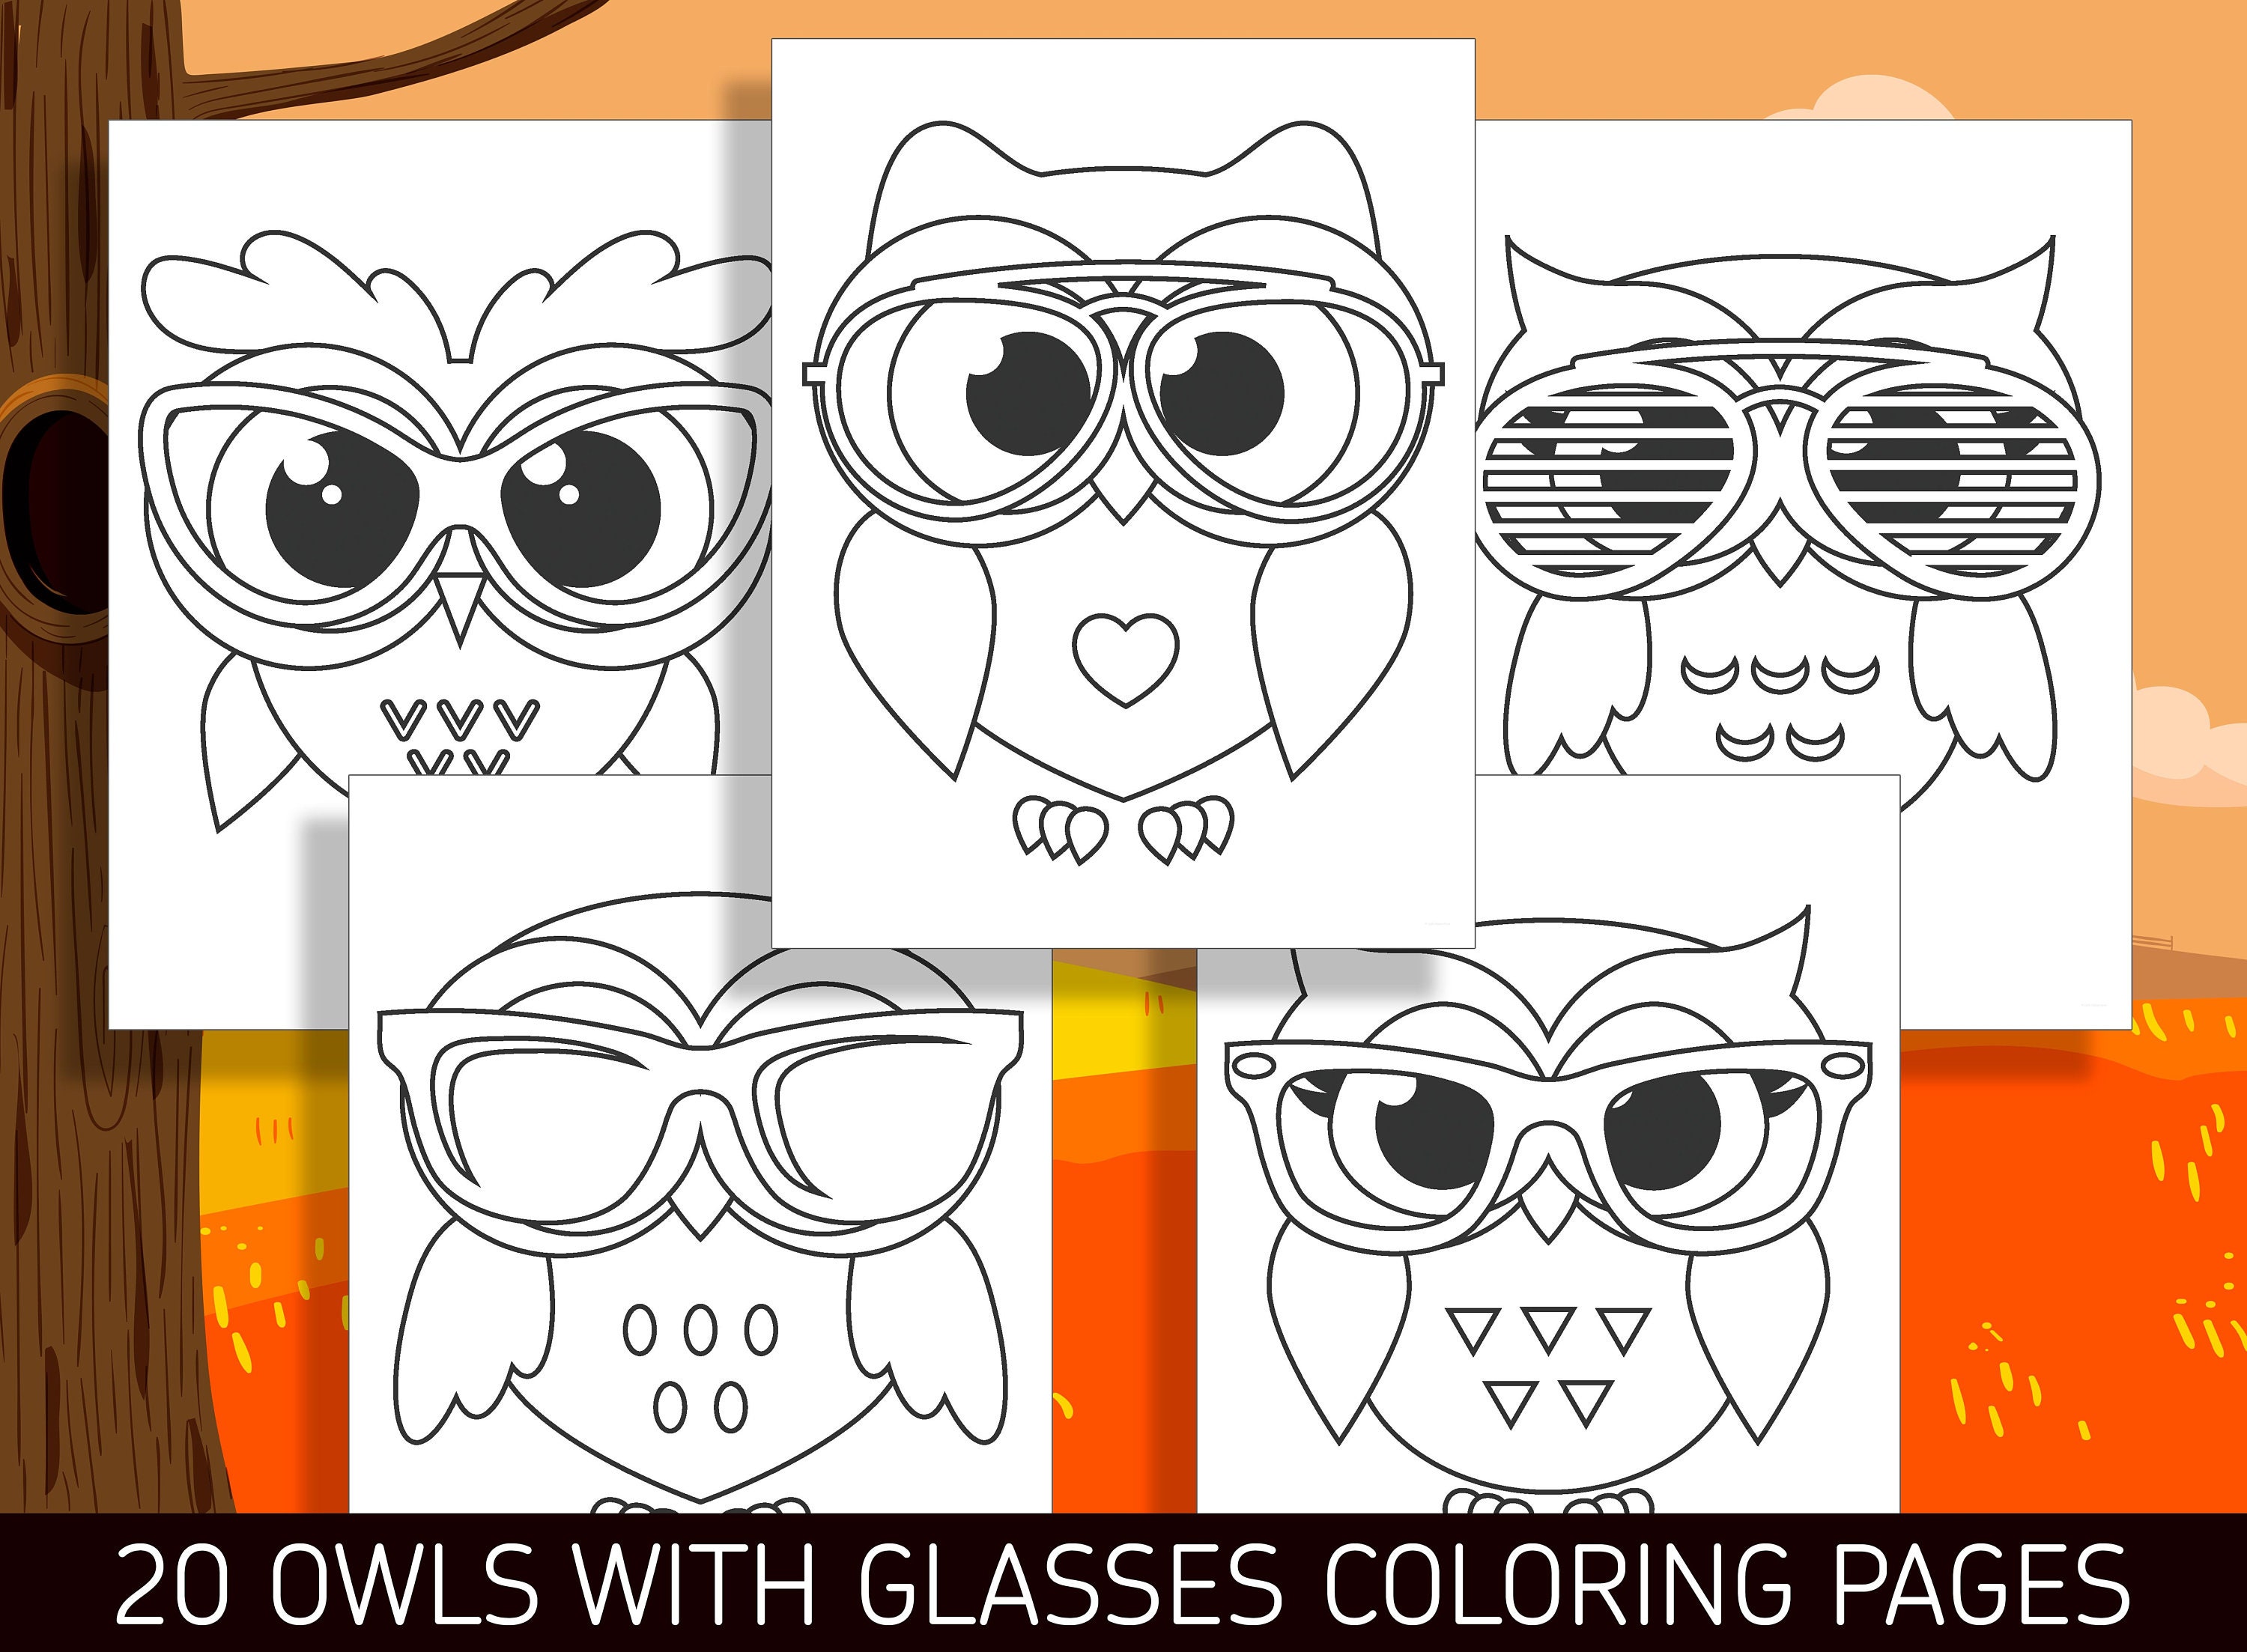 Adorable owl with glasses coloring pages for preschool and kindergarten kids pdf file instant download